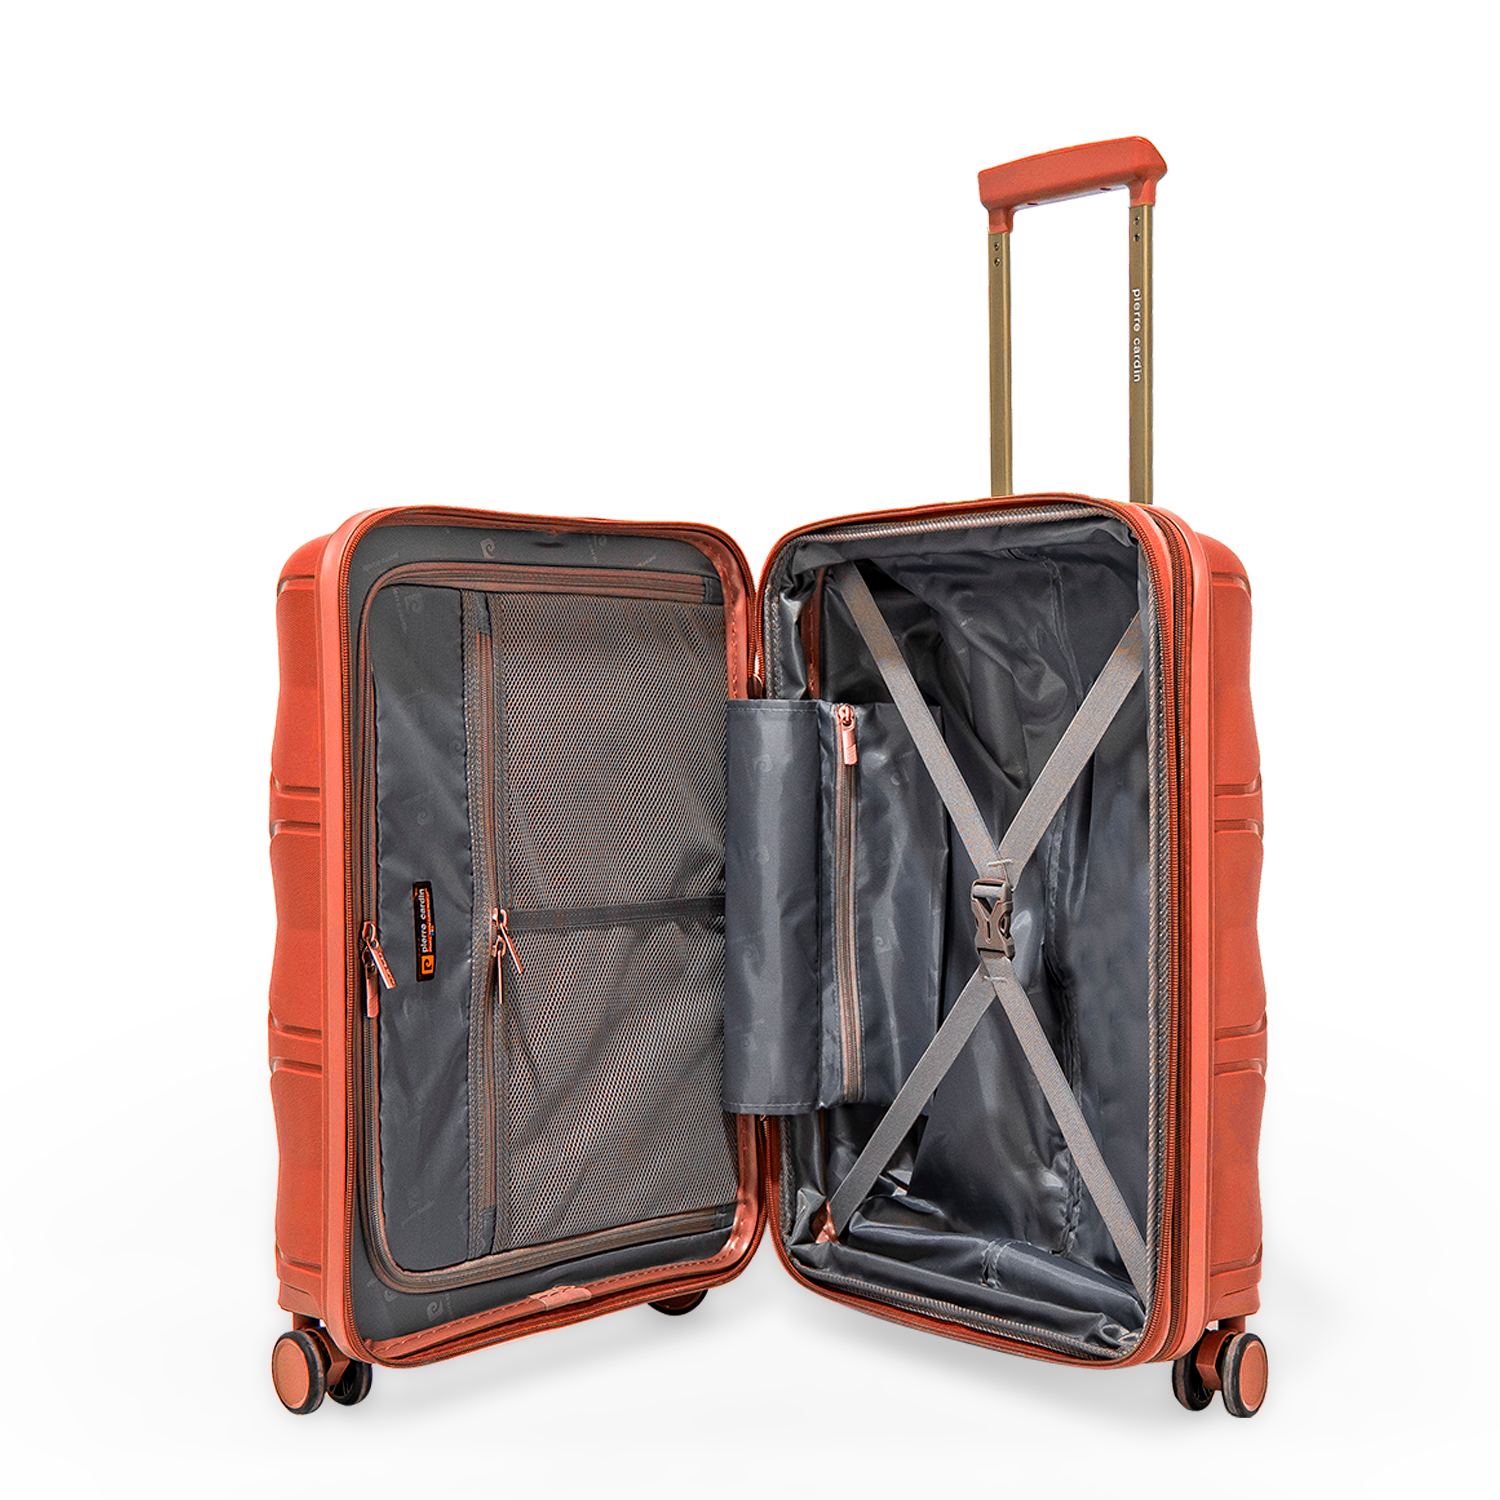 Pierre Cardin Trolley Strong Flexible Suitcases Set of 3 Peach